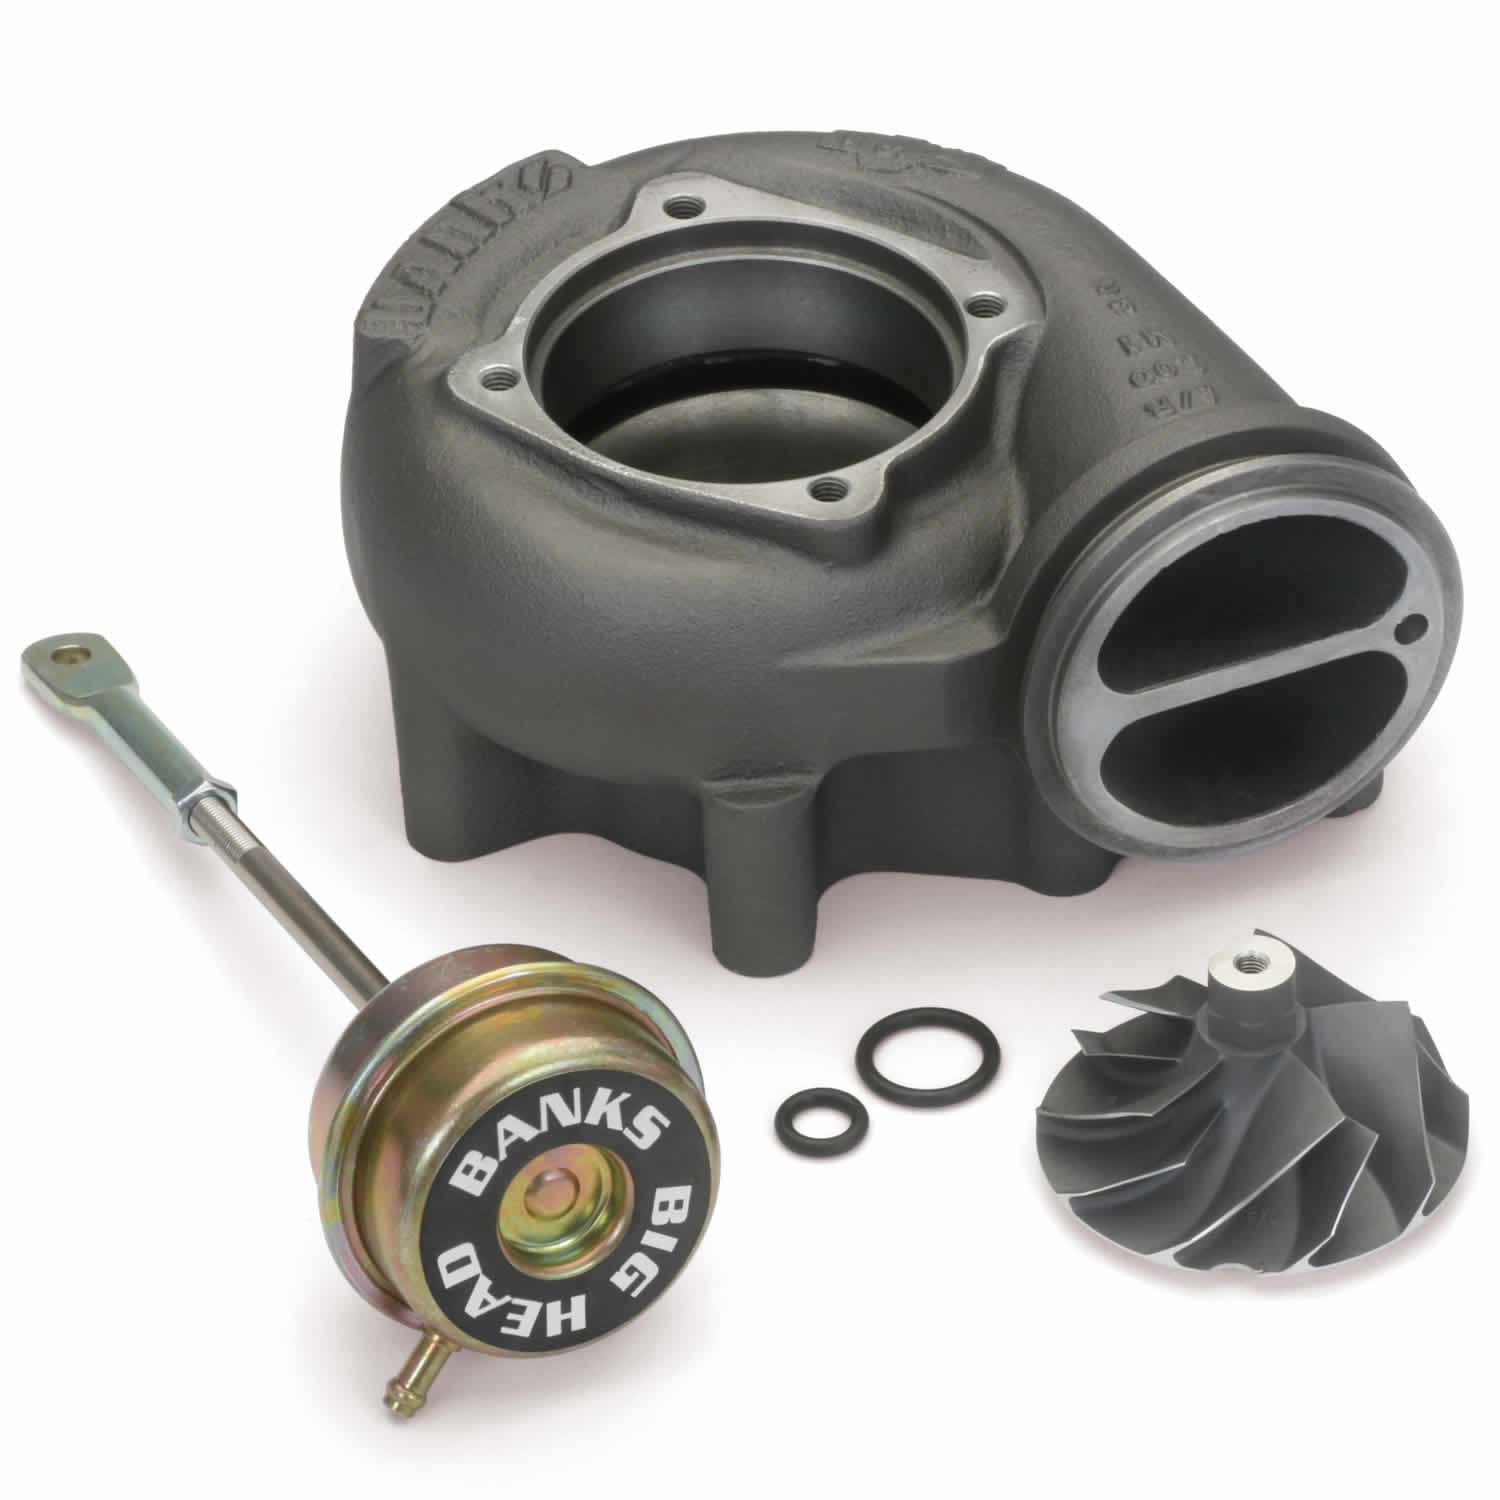 Turbo Upgrade Kit for 1999-2003 Ford Excursion 7.3L/1999-2003 Ford F-Series Super Duty 7.3L